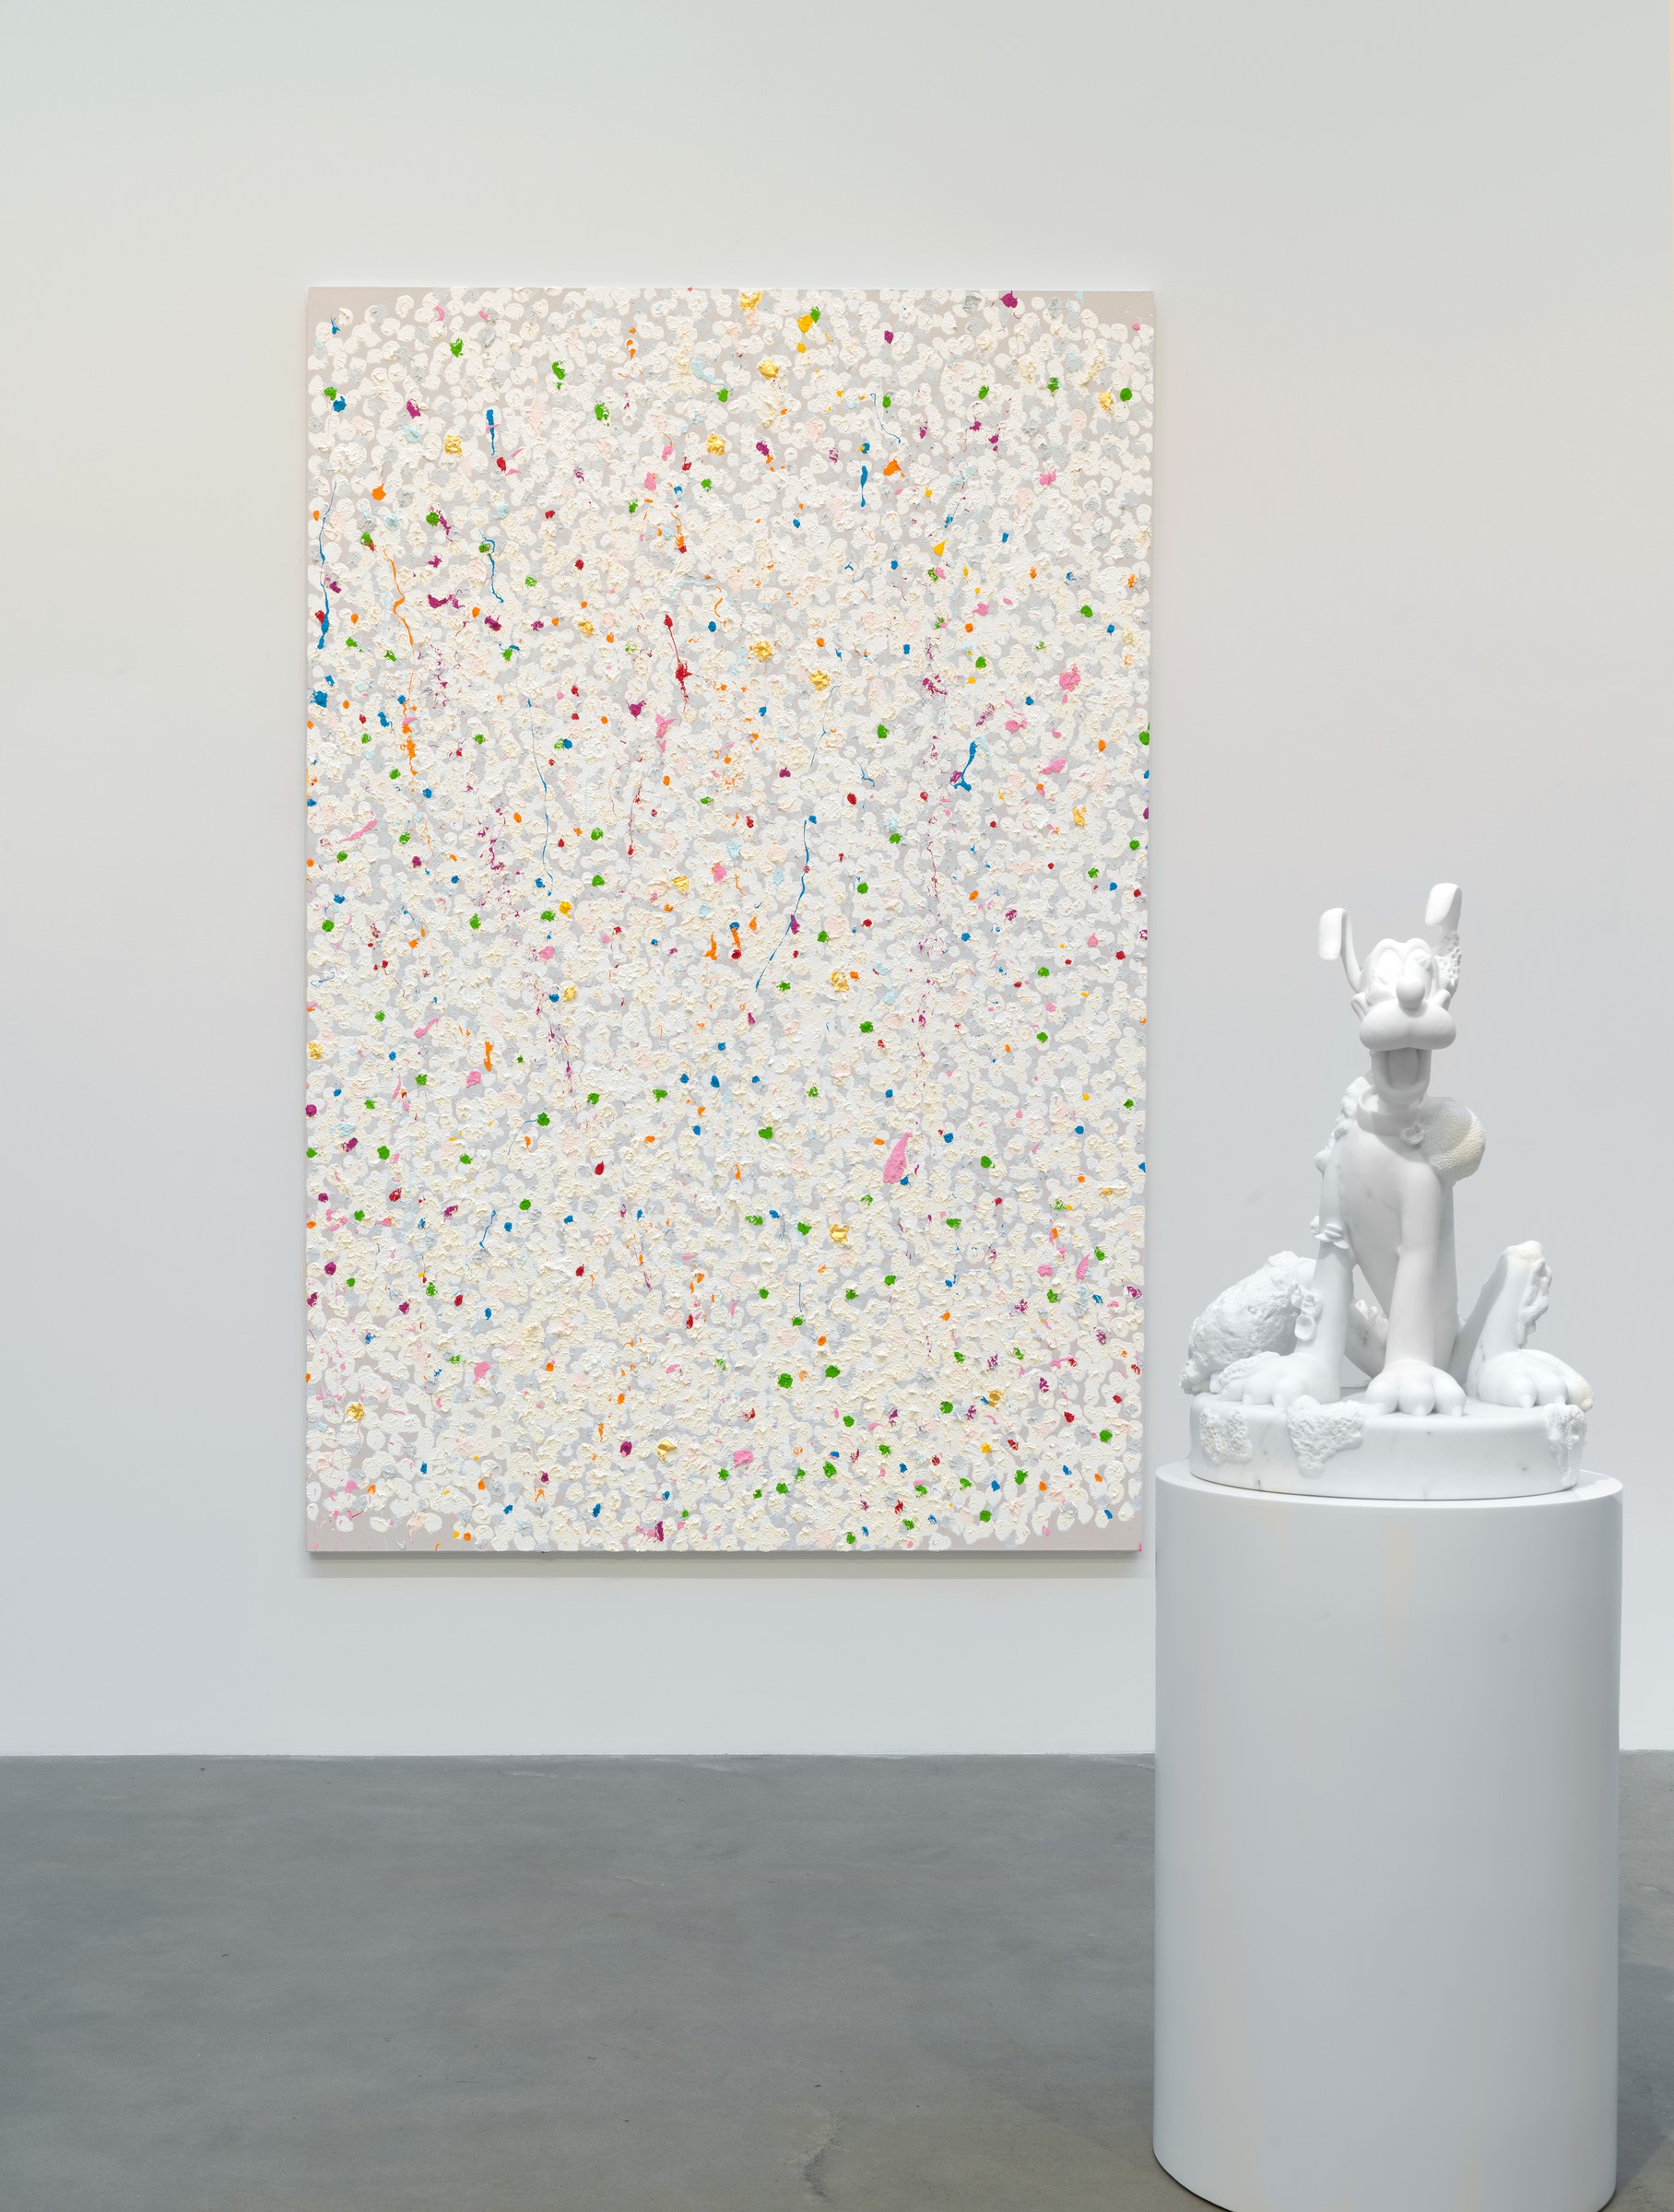 Damien Hirst: Forgiving and Forgetting, 541 West 24th Street, New 